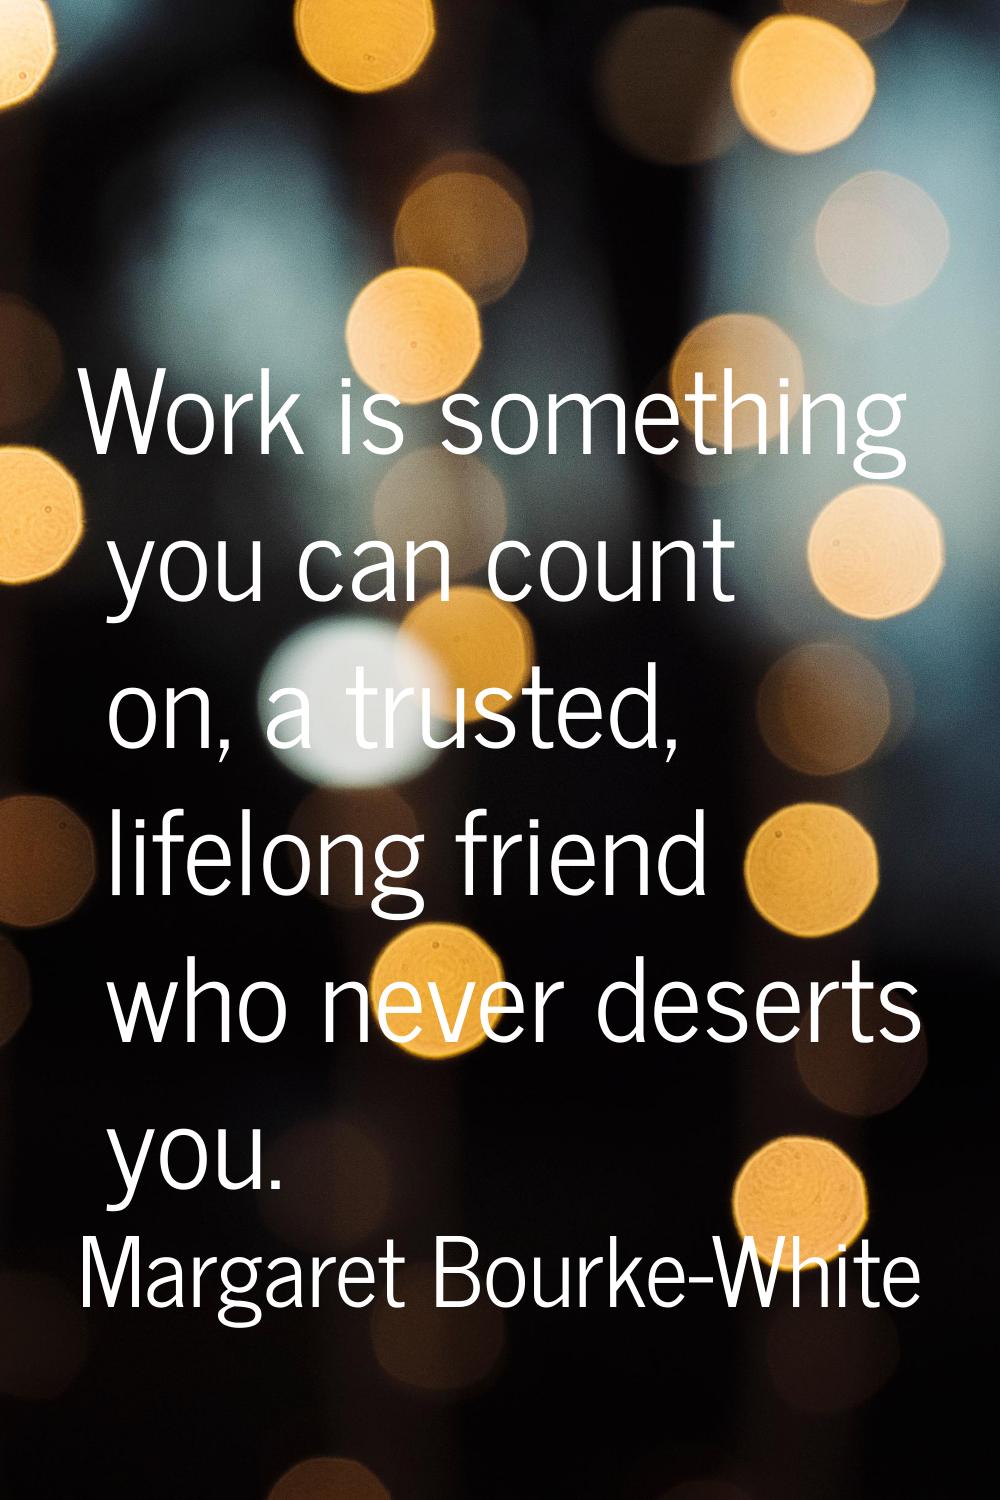 Work is something you can count on, a trusted, lifelong friend who never deserts you.